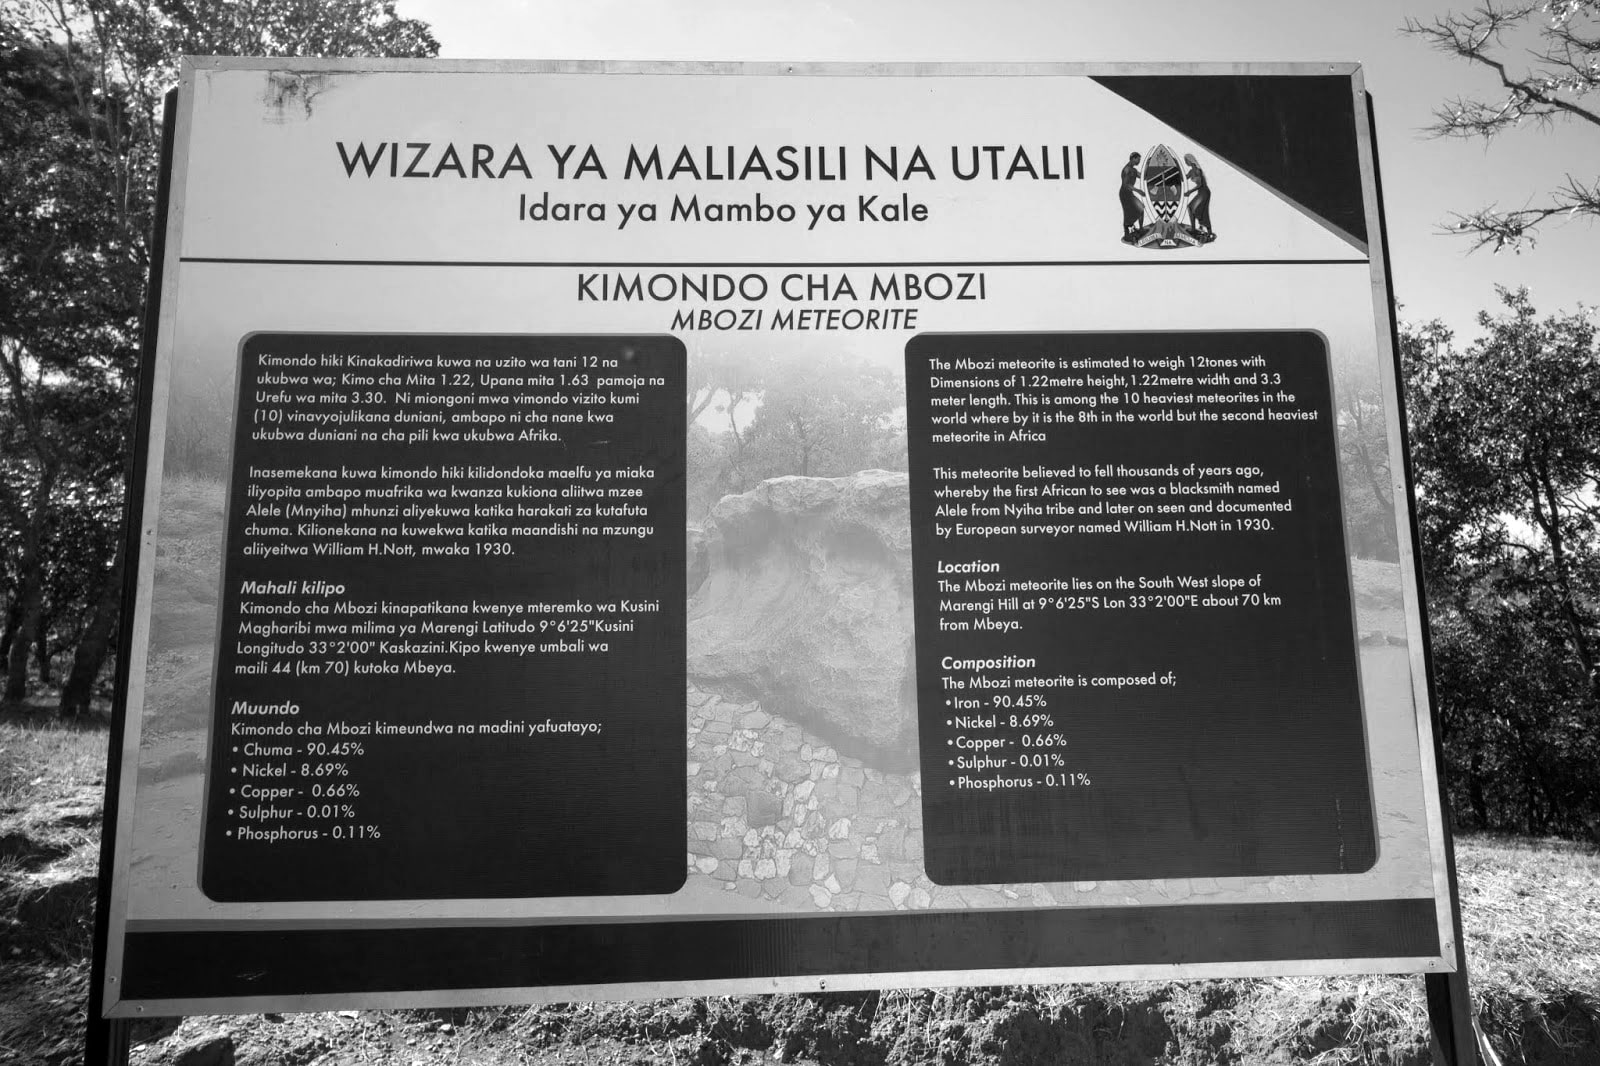 A sign on the way to Mbozi meteorite site